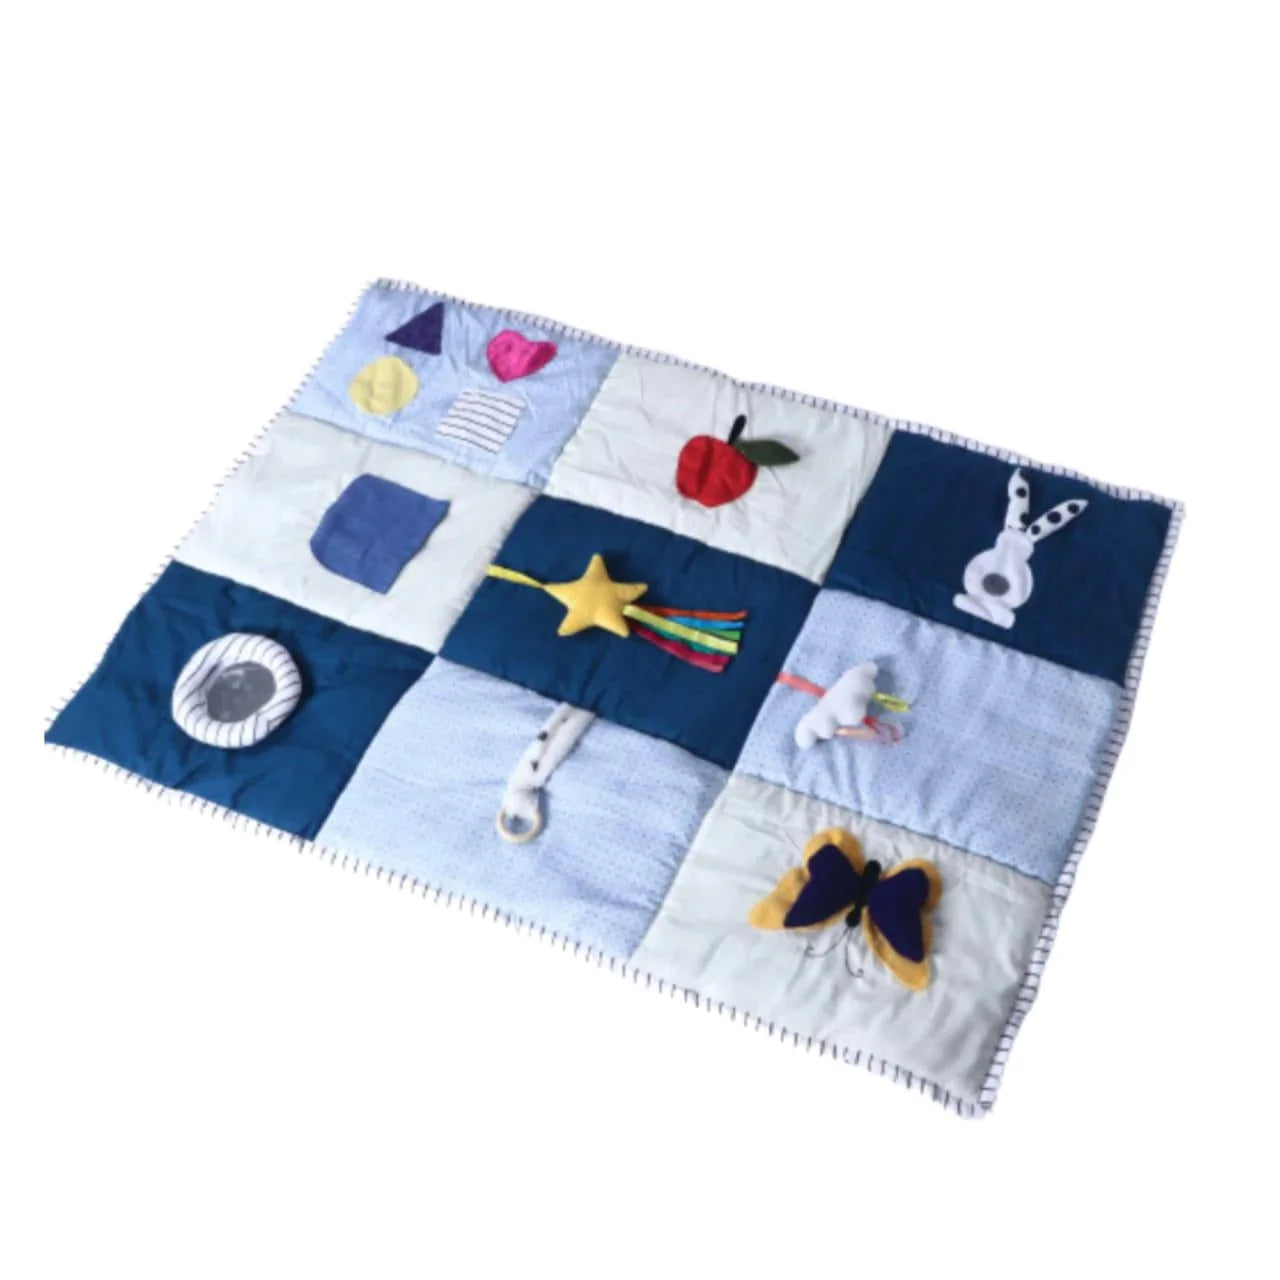 Buy Sensory Cloth Play Mat with Tummy Time Mirrorfor 0-1 Year Babies - SkilloToys.com